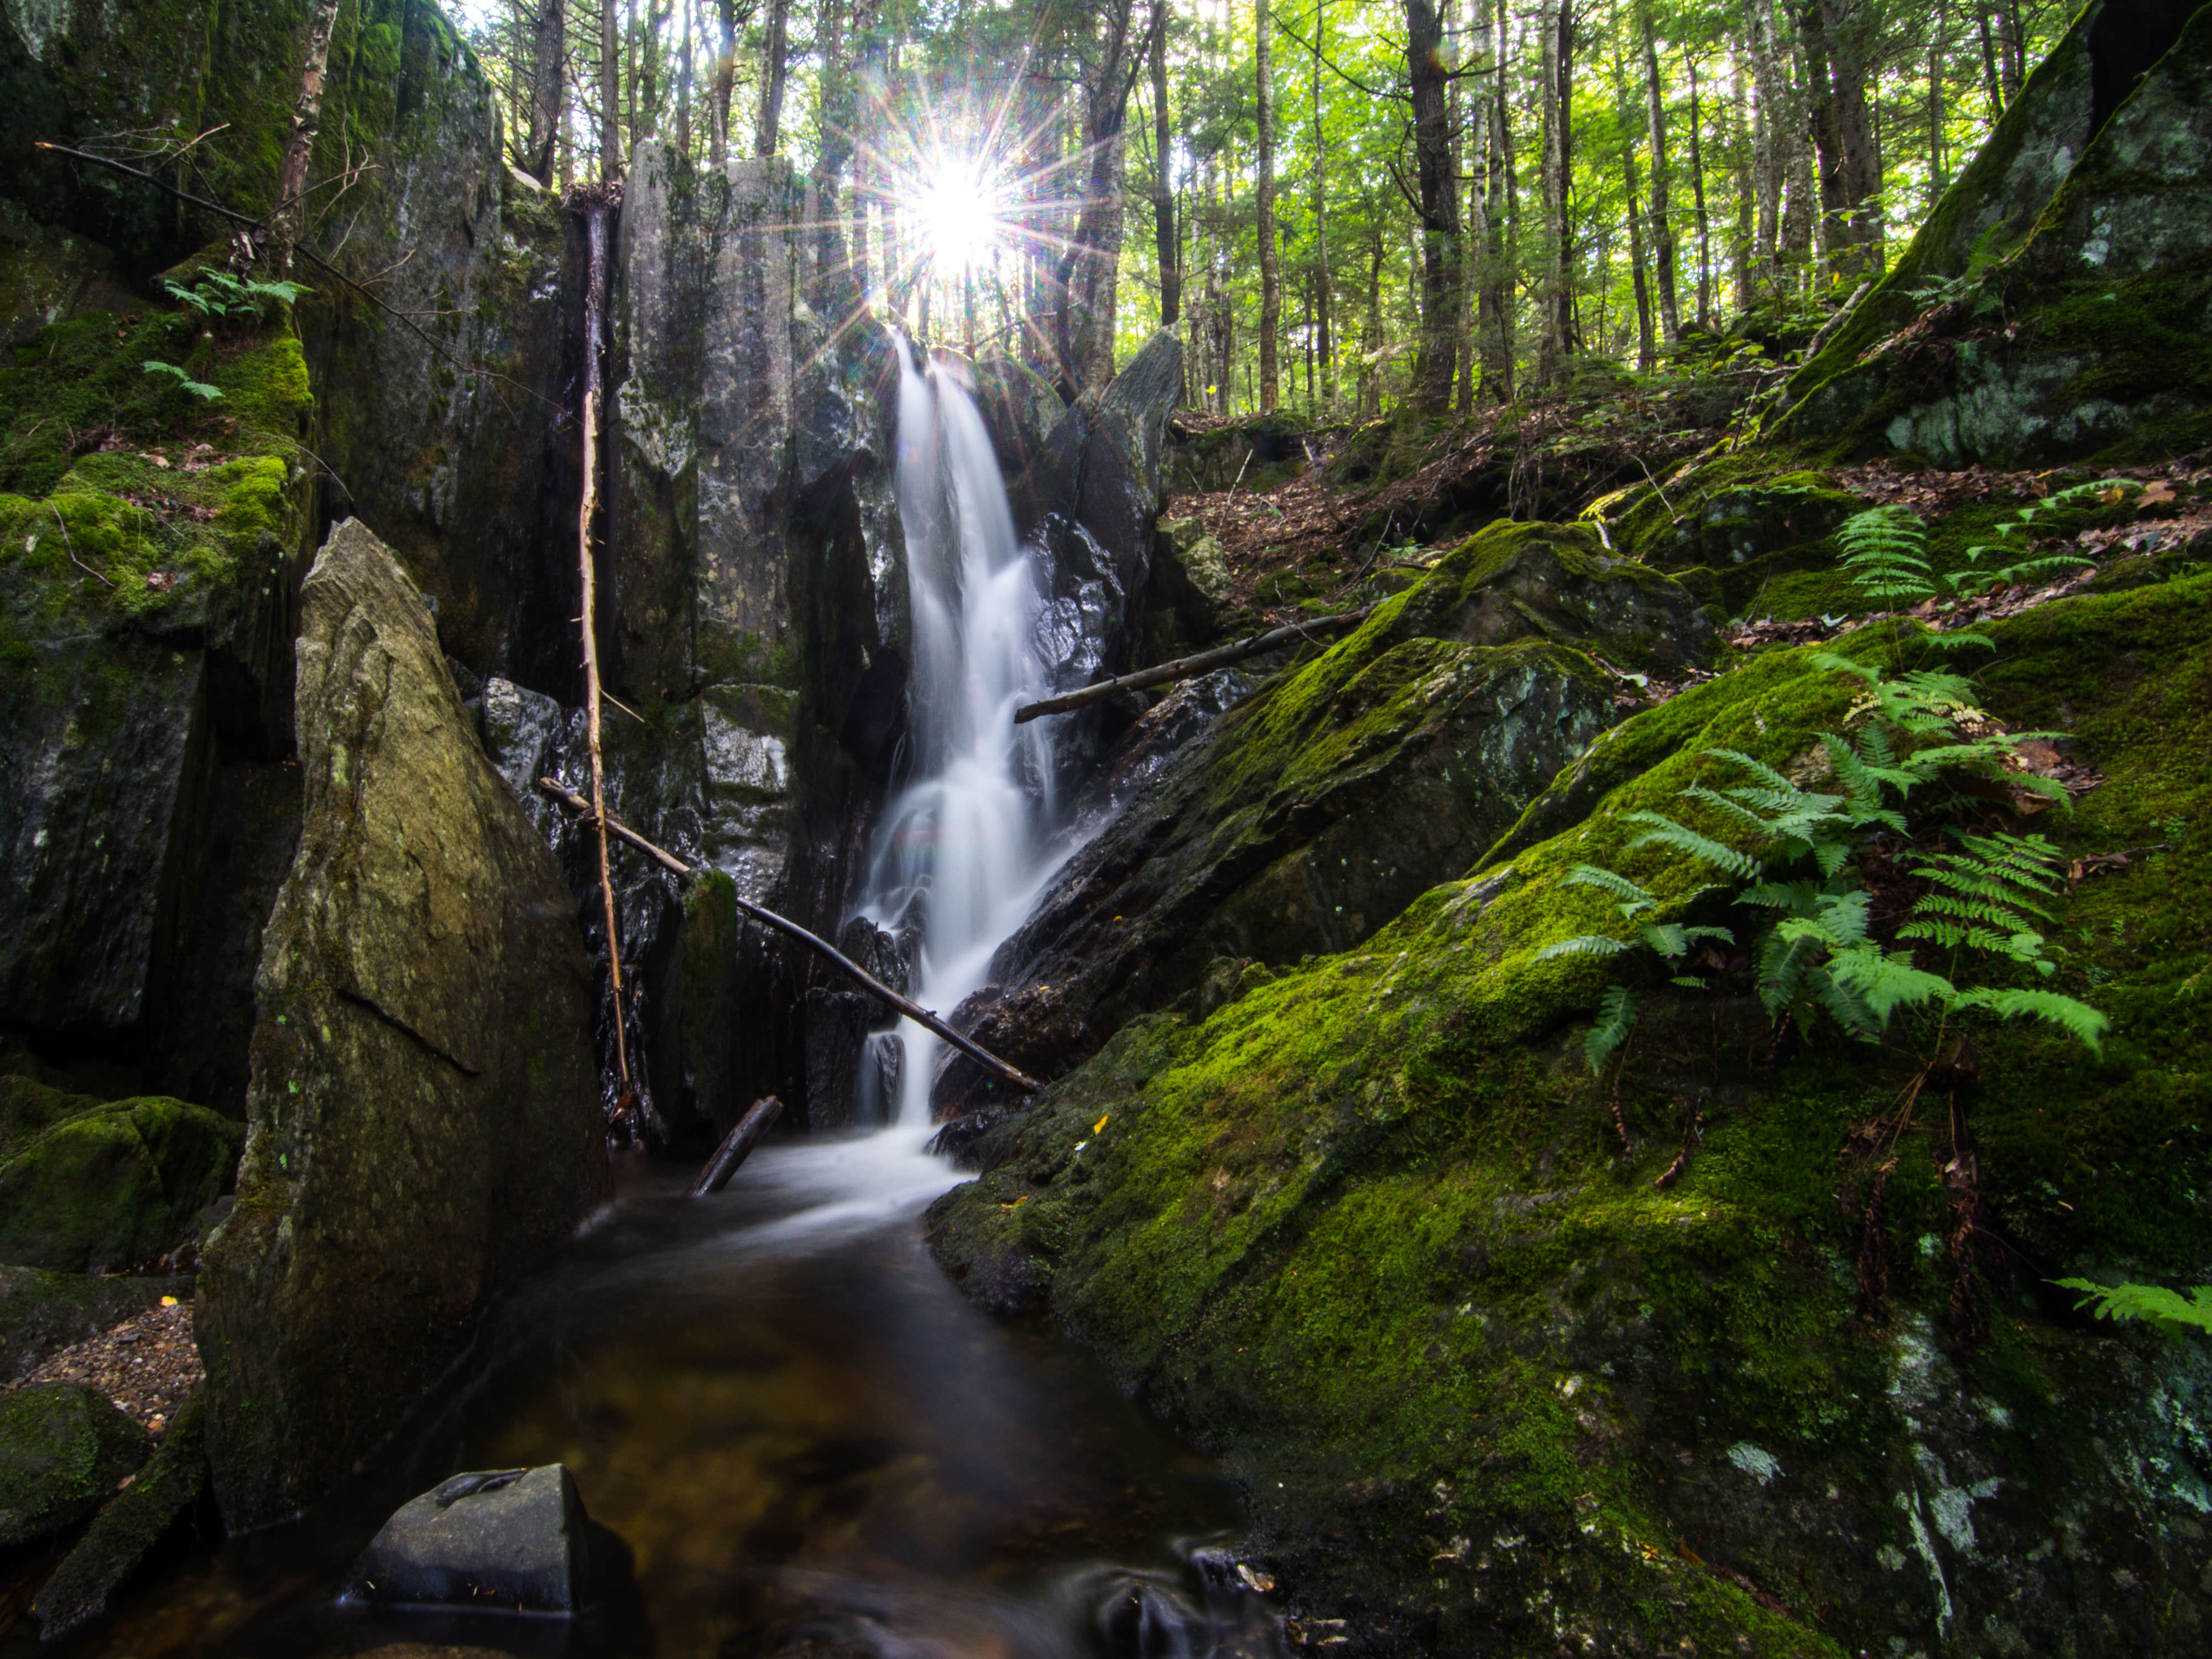 A small waterfall plunges down the side of a rock at TNC's Surry Mountain Preserve.